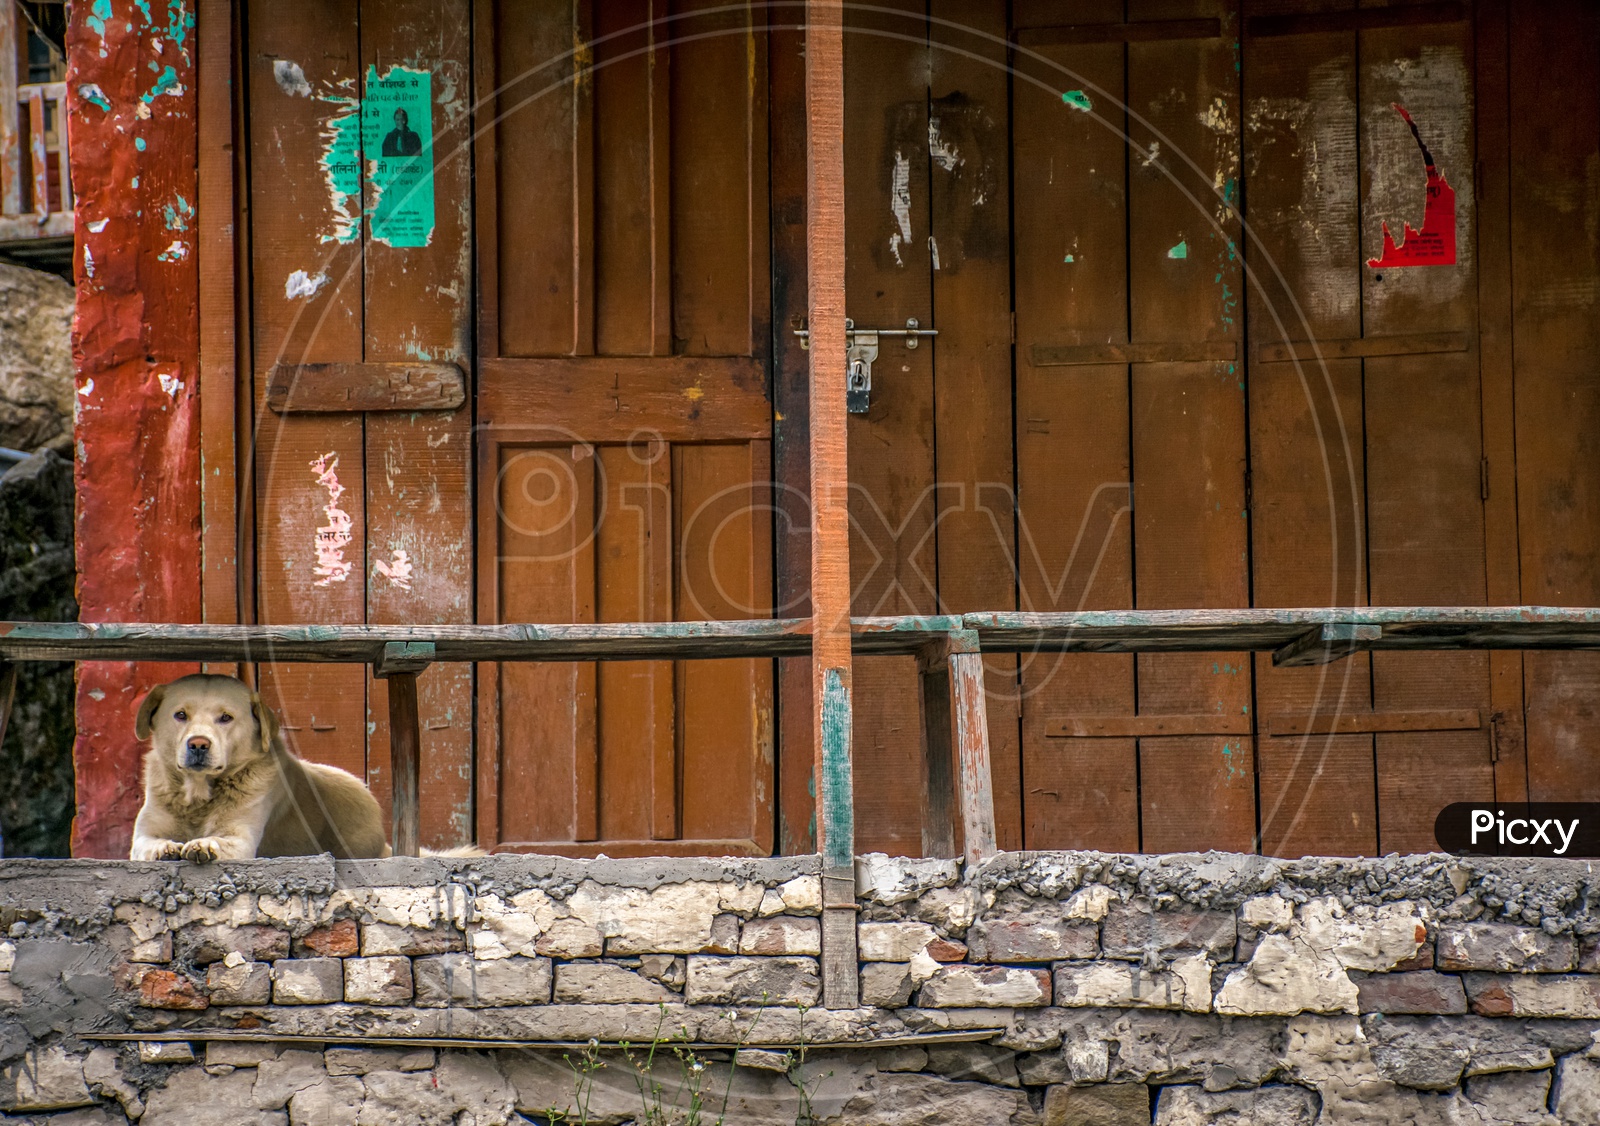 A little pup chilling on the Manali streets